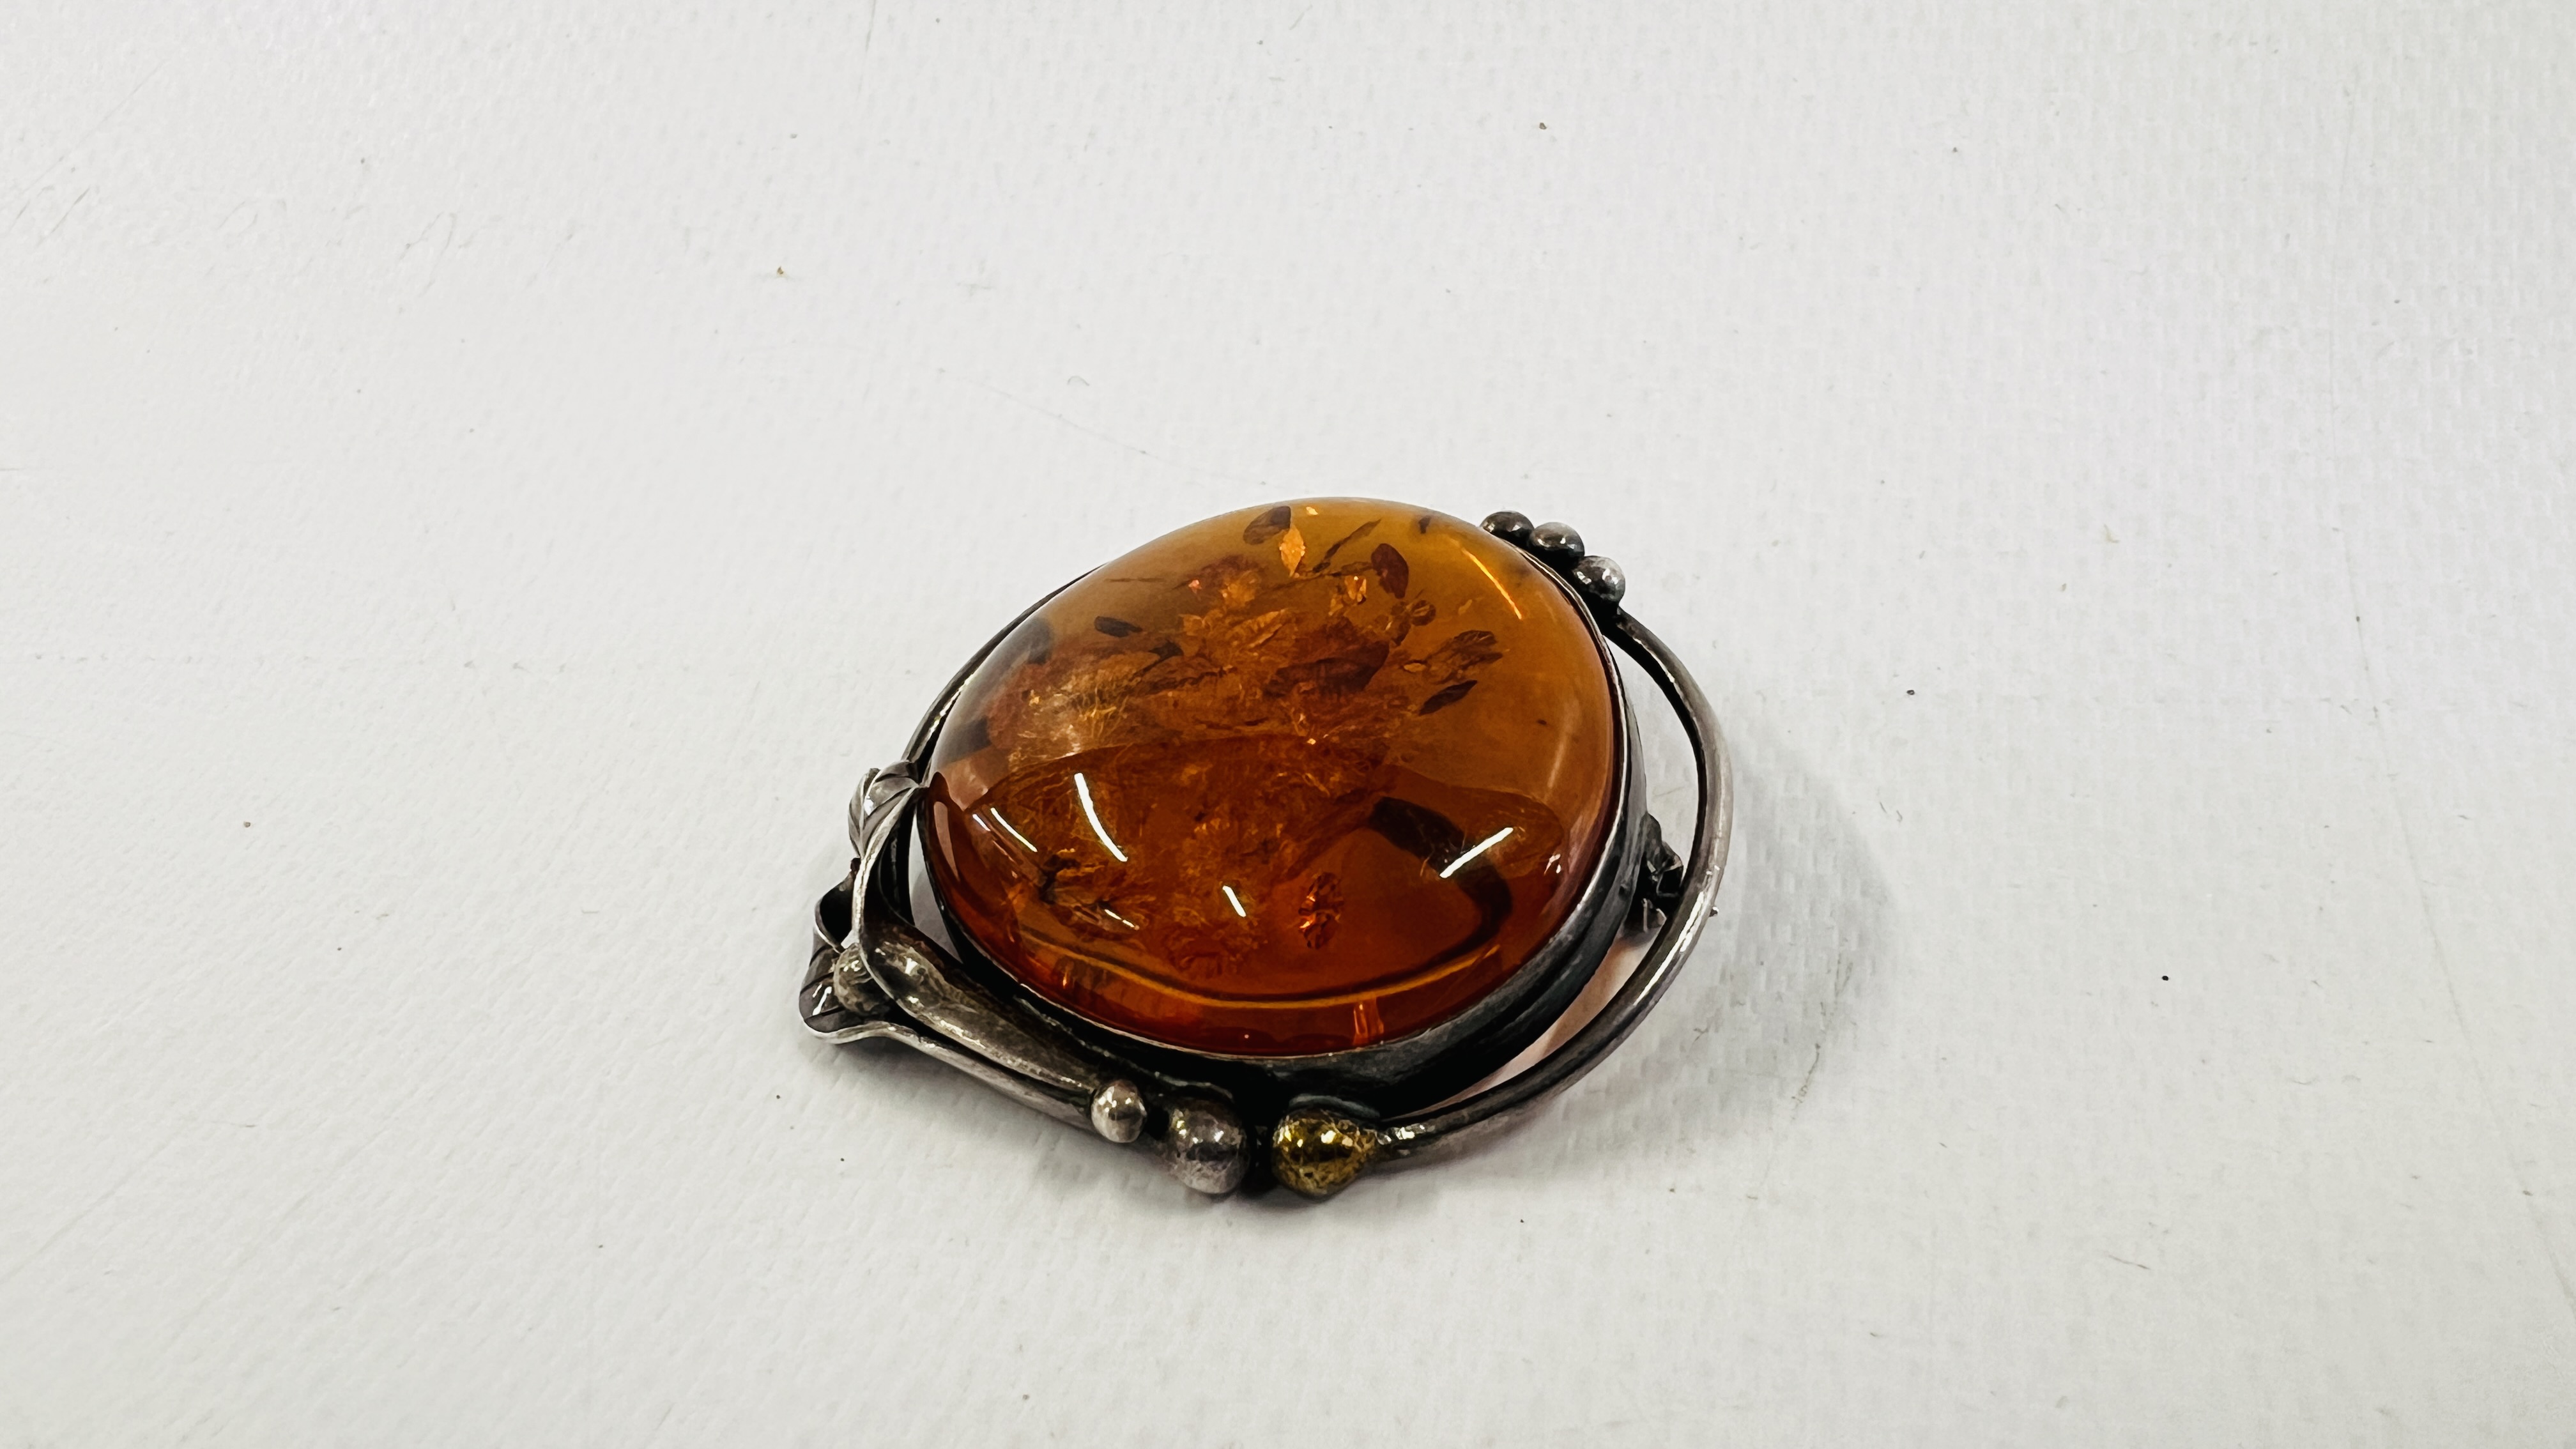 A VINTAGE SILVER BROOCH INSET WITH AN AMBER TYPE STONE. - Image 2 of 5